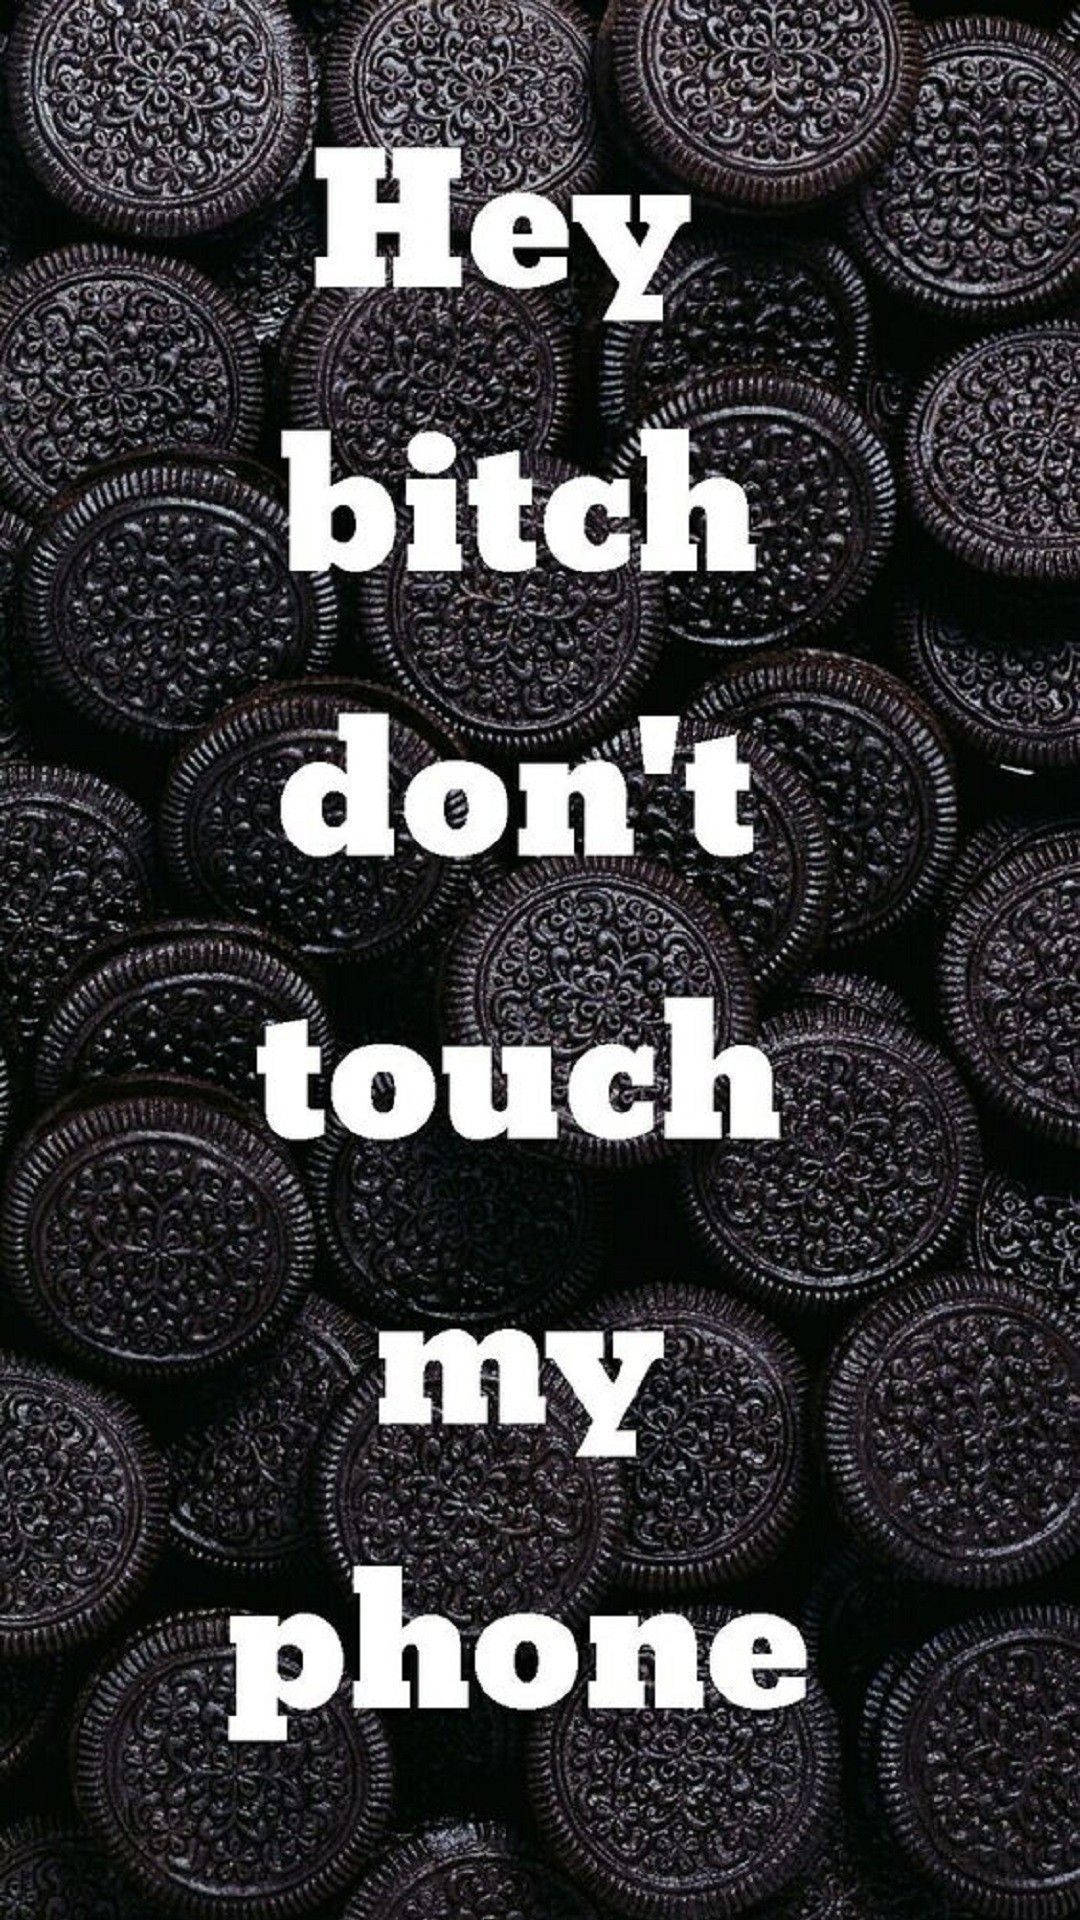 Dont Touch My Phone 1080X1920 Wallpaper and Background Image